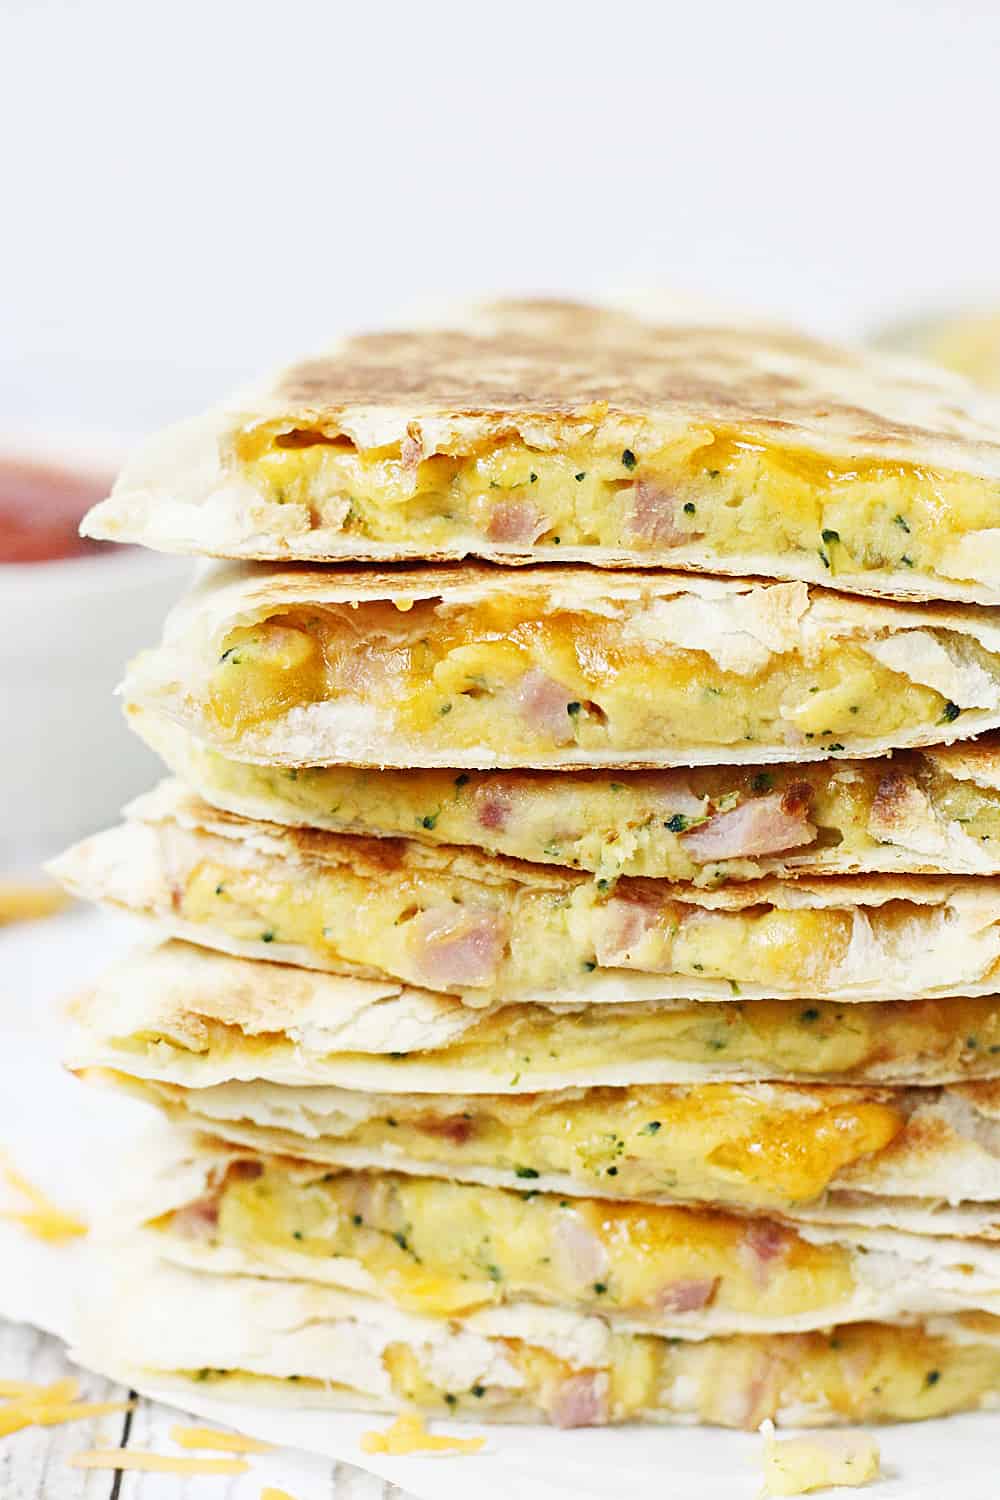 5-Minute Broccoli Ham & Cheese Quesadilla -- A quick and easy way to prepare a midweek meal and pack in some extra vegetables. Yay!